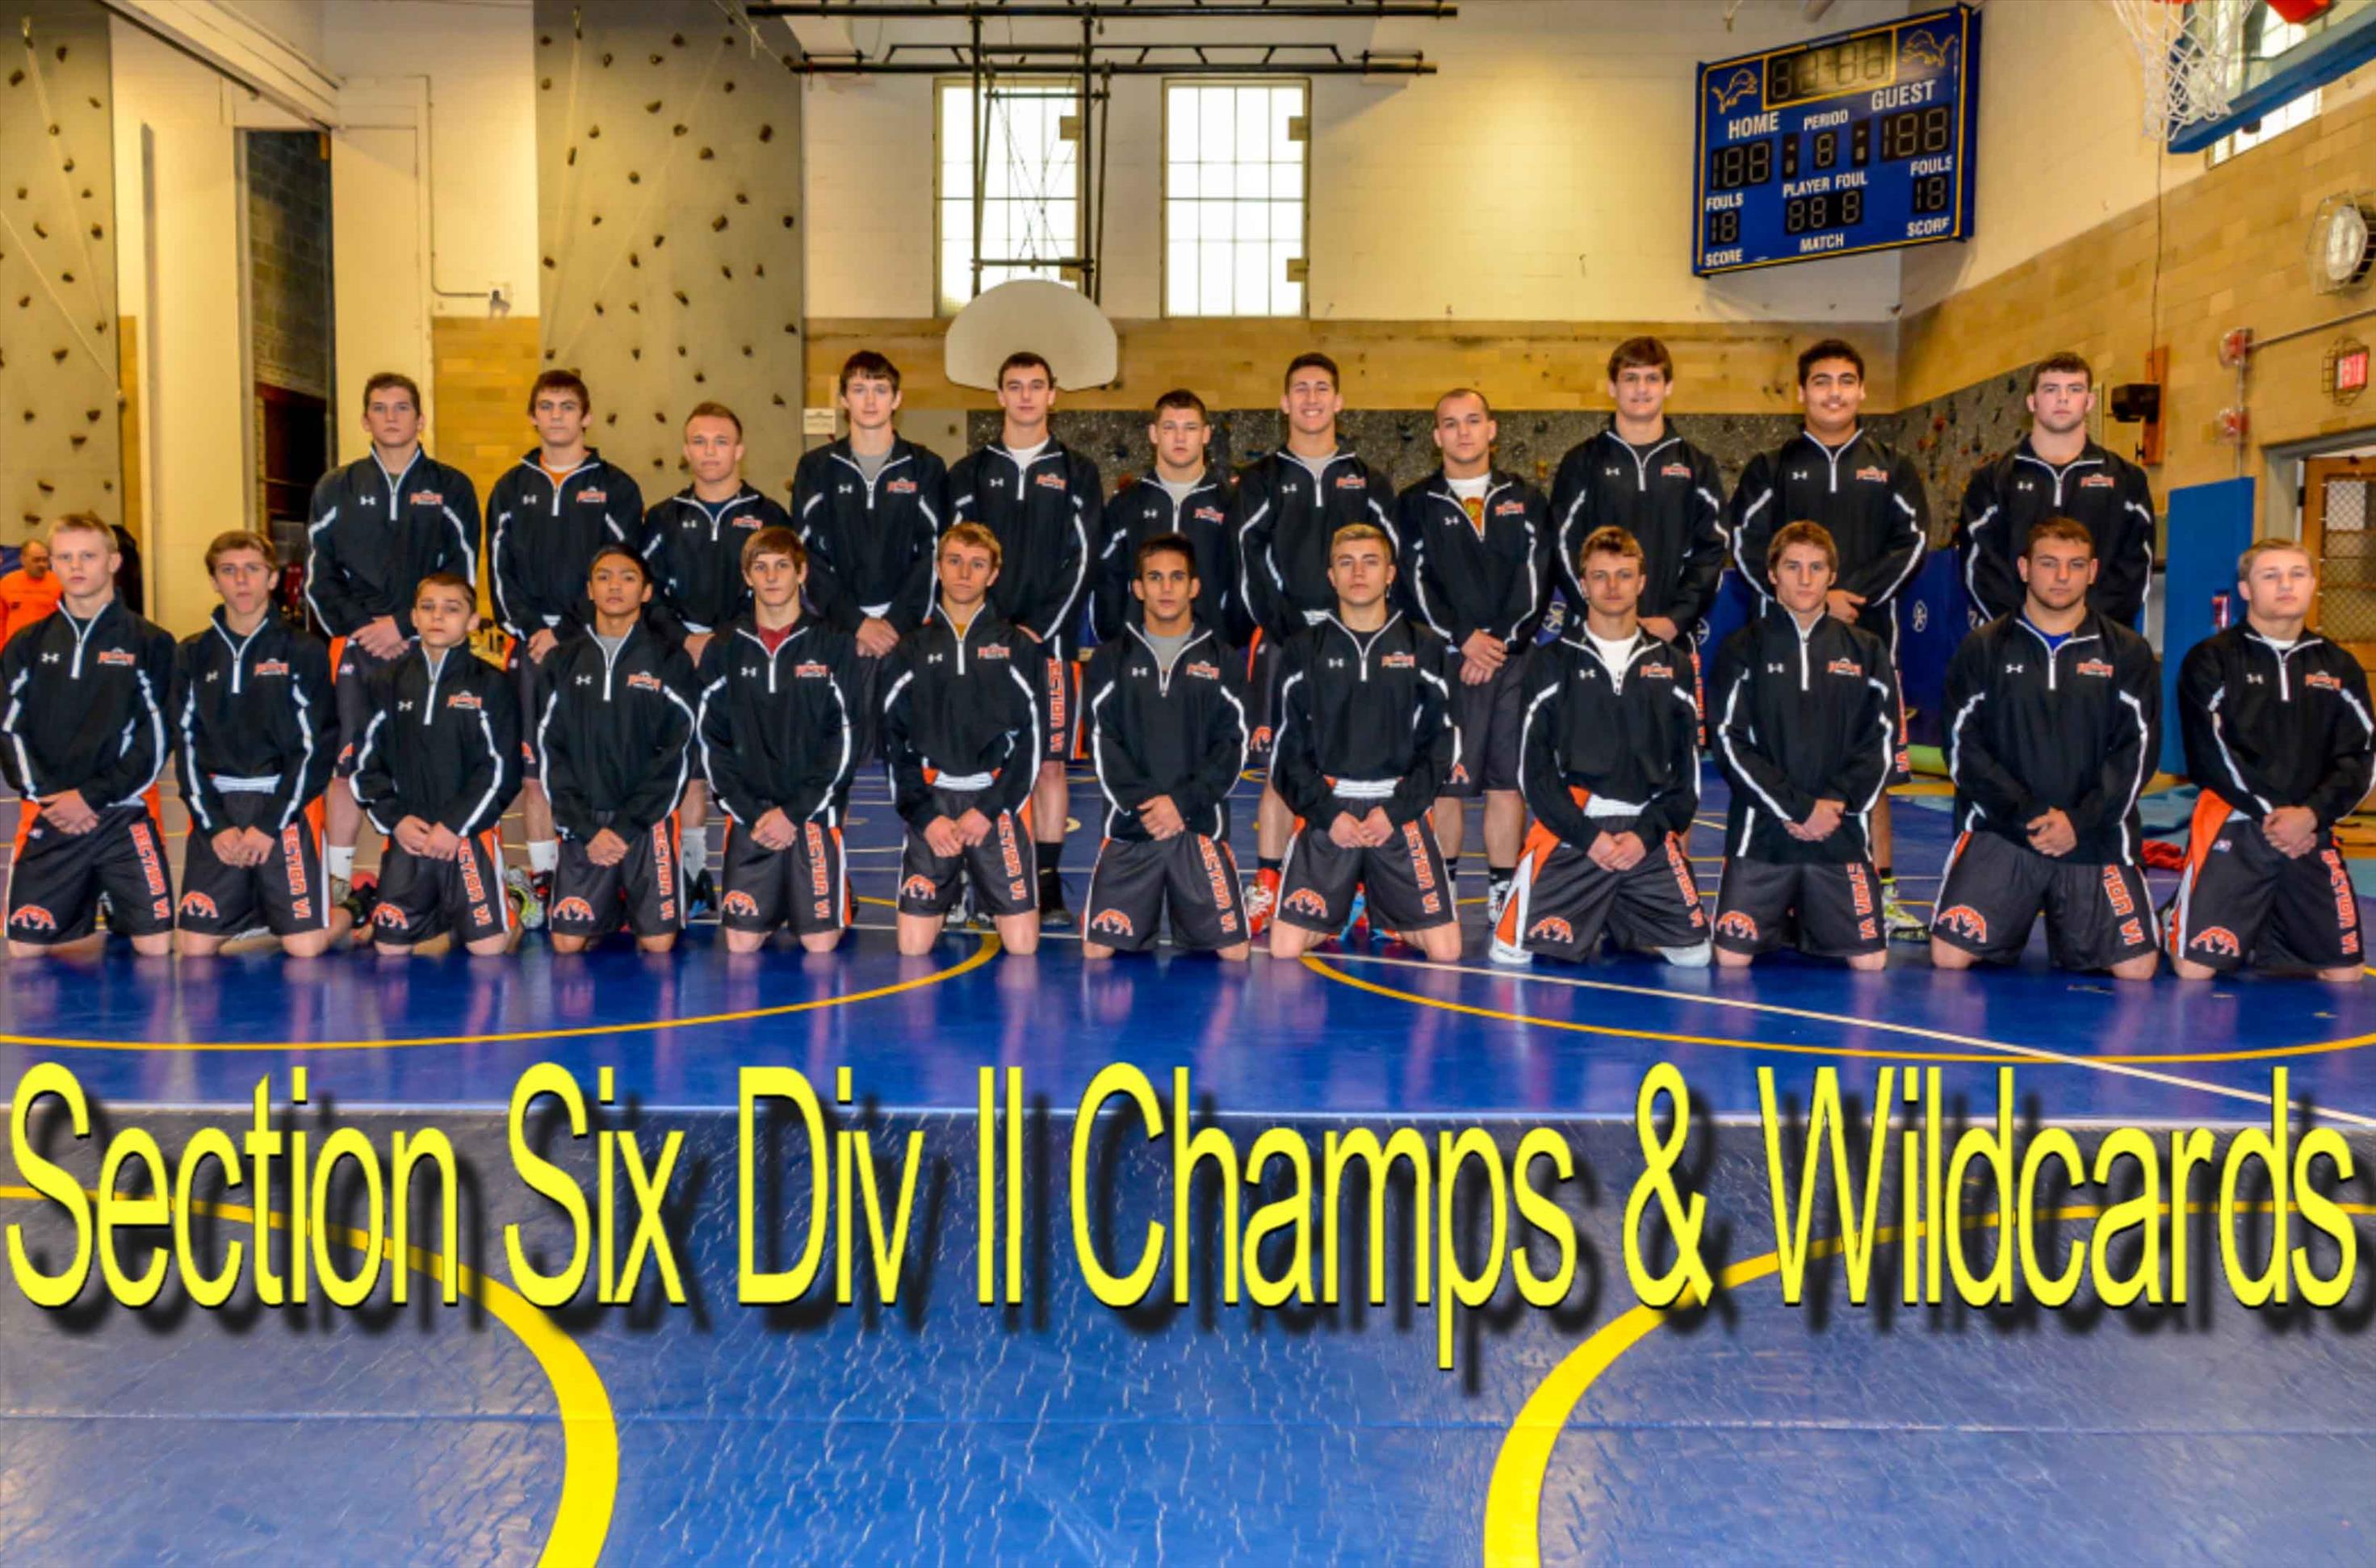 Section Six Div II Champs & Wildcards